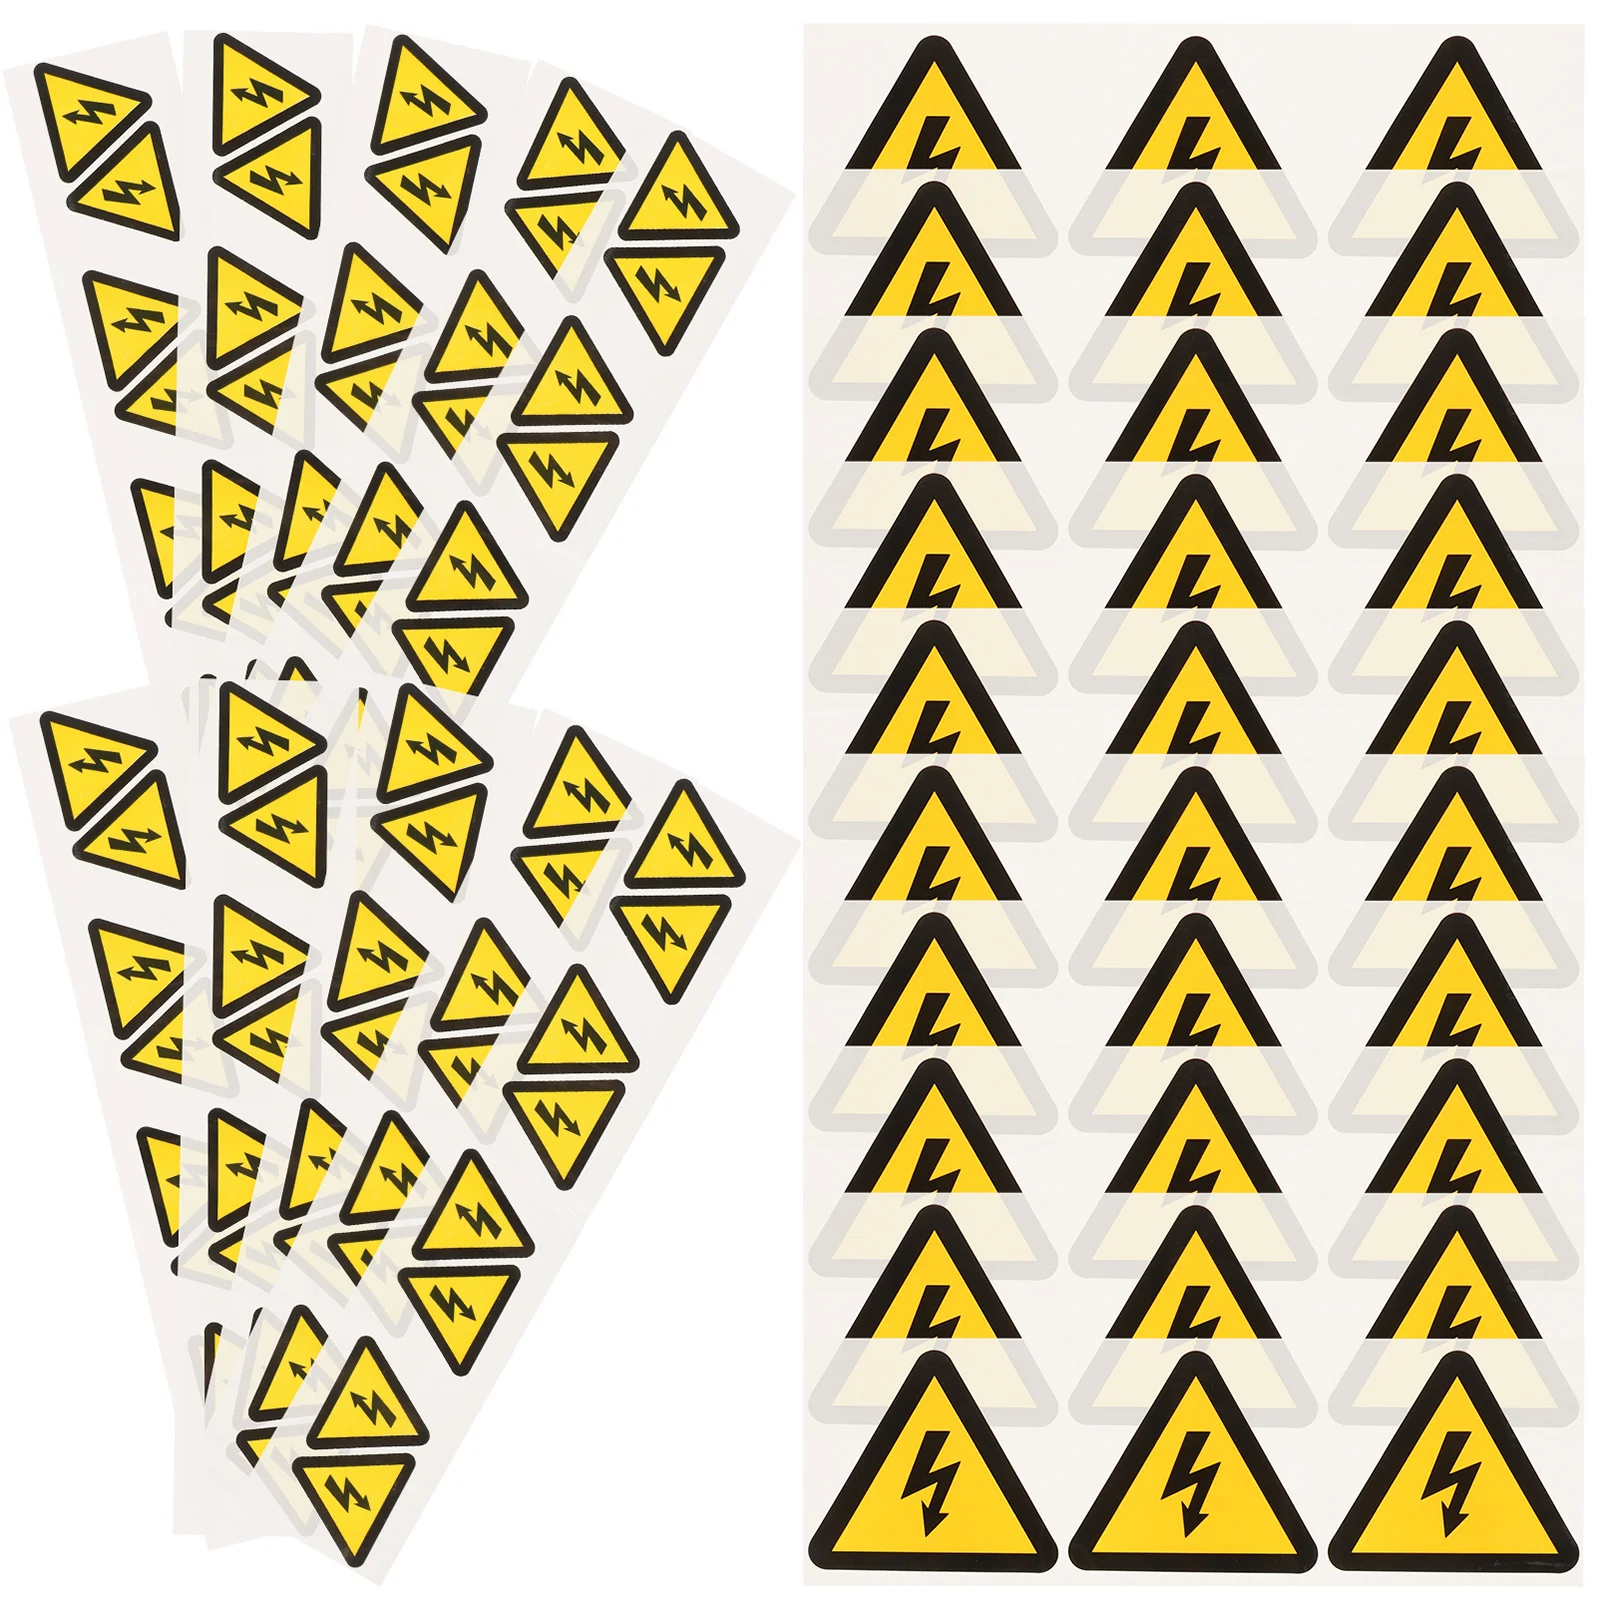 

Tofficu Yellow Tag High Voltage Electrical Shock Hazard Vinyl Label Electric Shock Disconnect Power Before